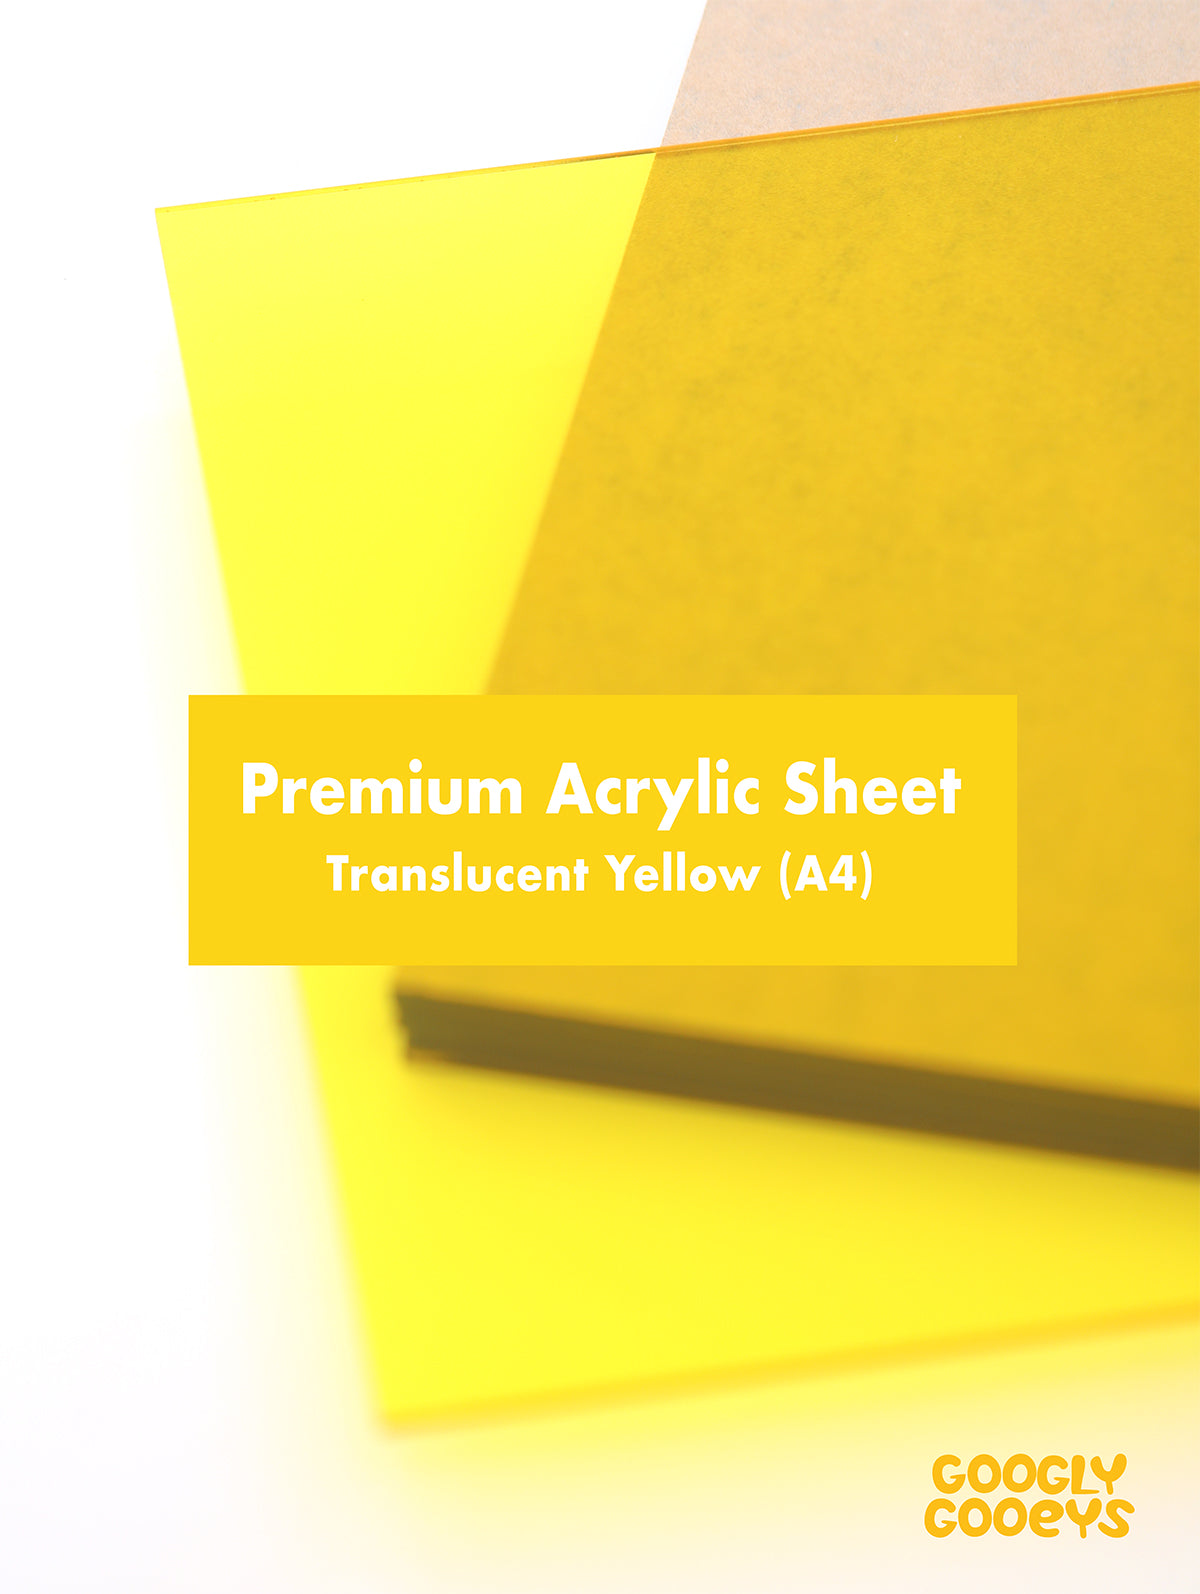 Premium Acrylic Sheet | for Laser Cutter, Engraving and Cutting